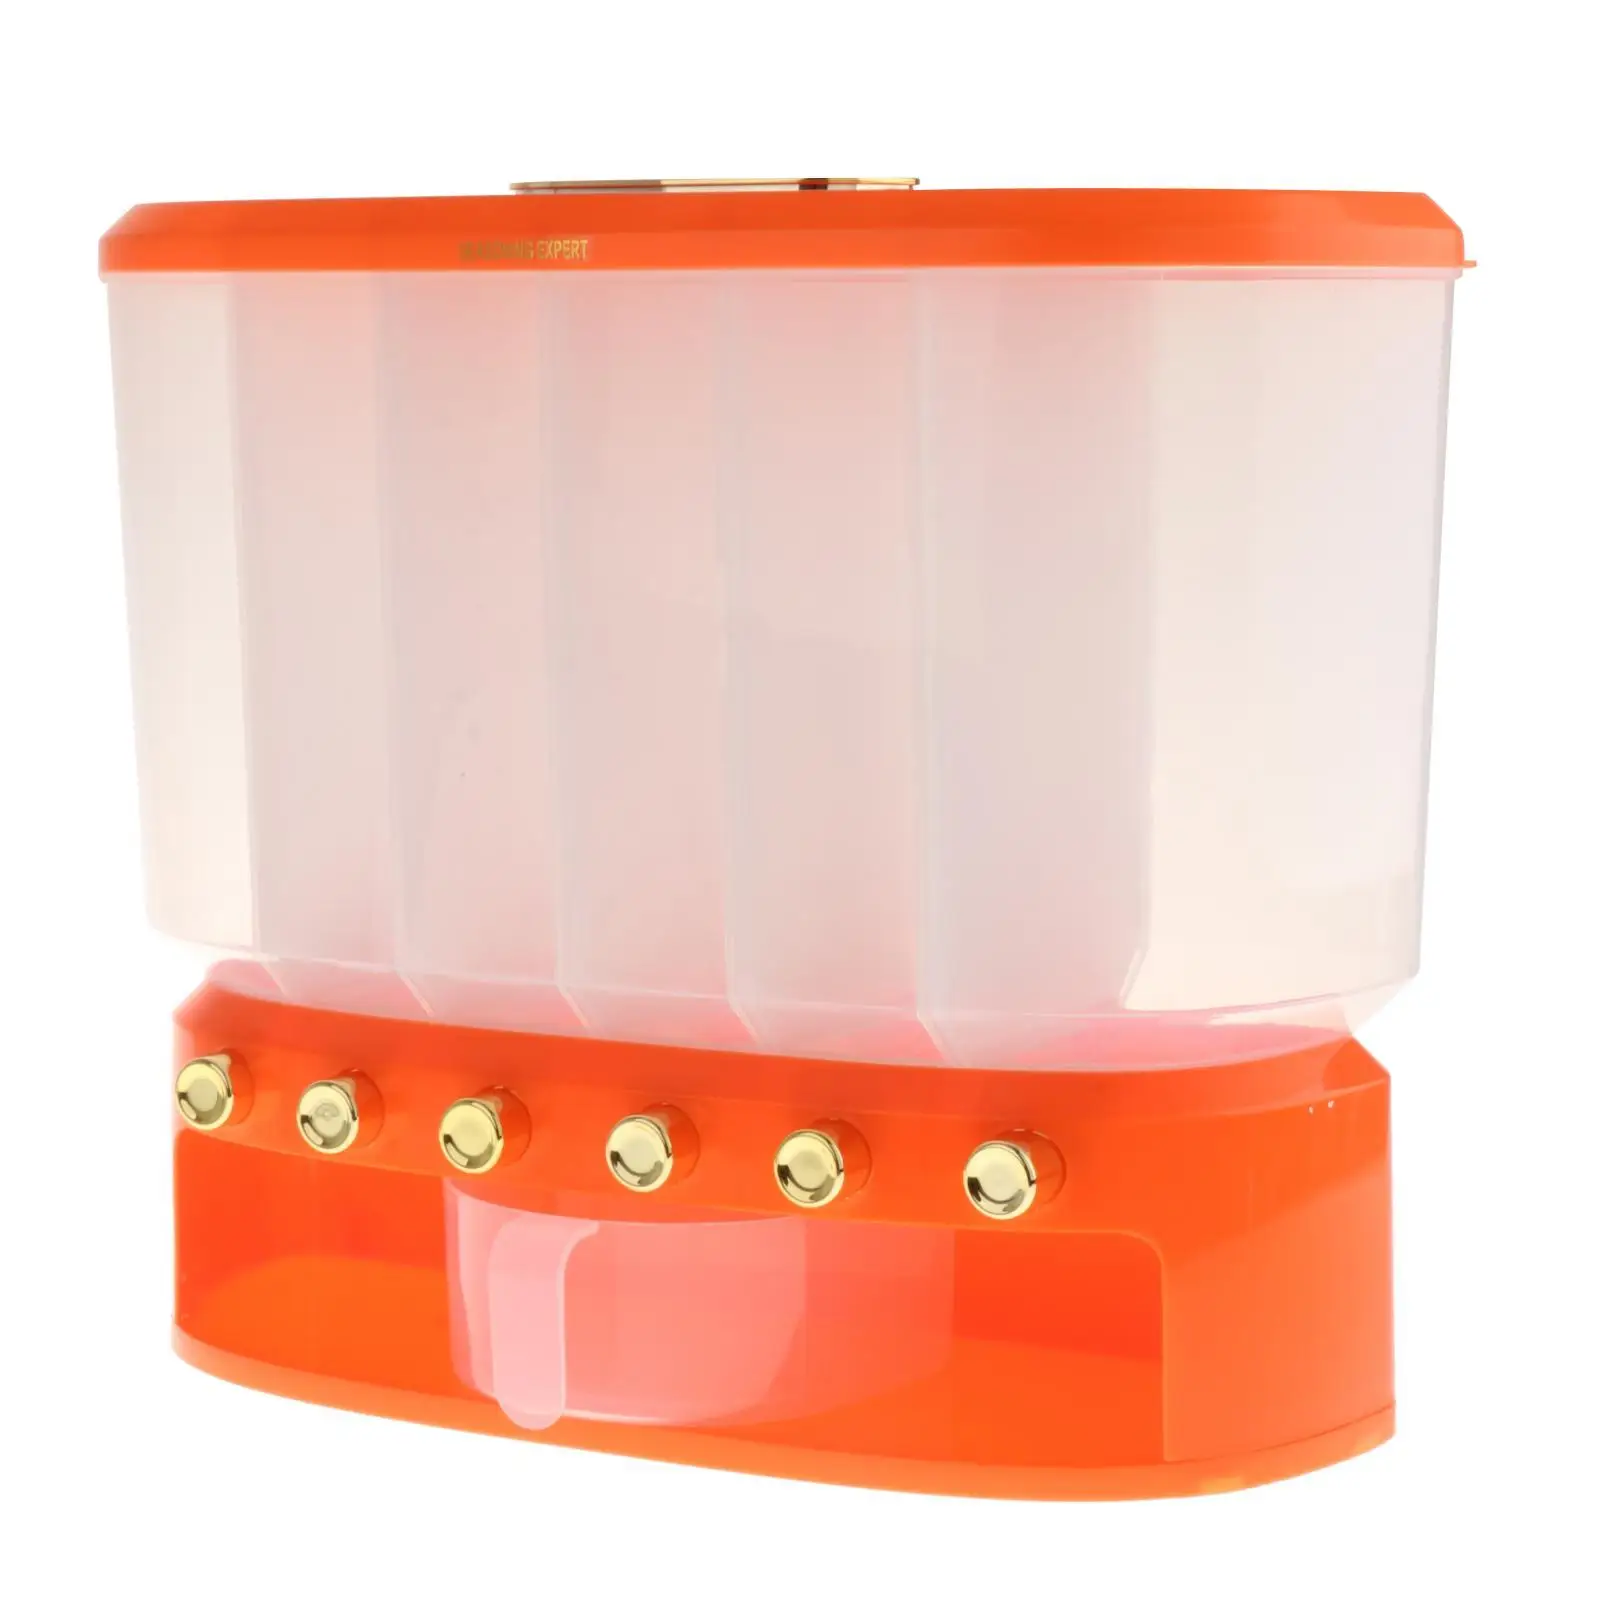 Rice Separate Bucket 6 Grids with Lids Airtight Food Storage for Restaurant